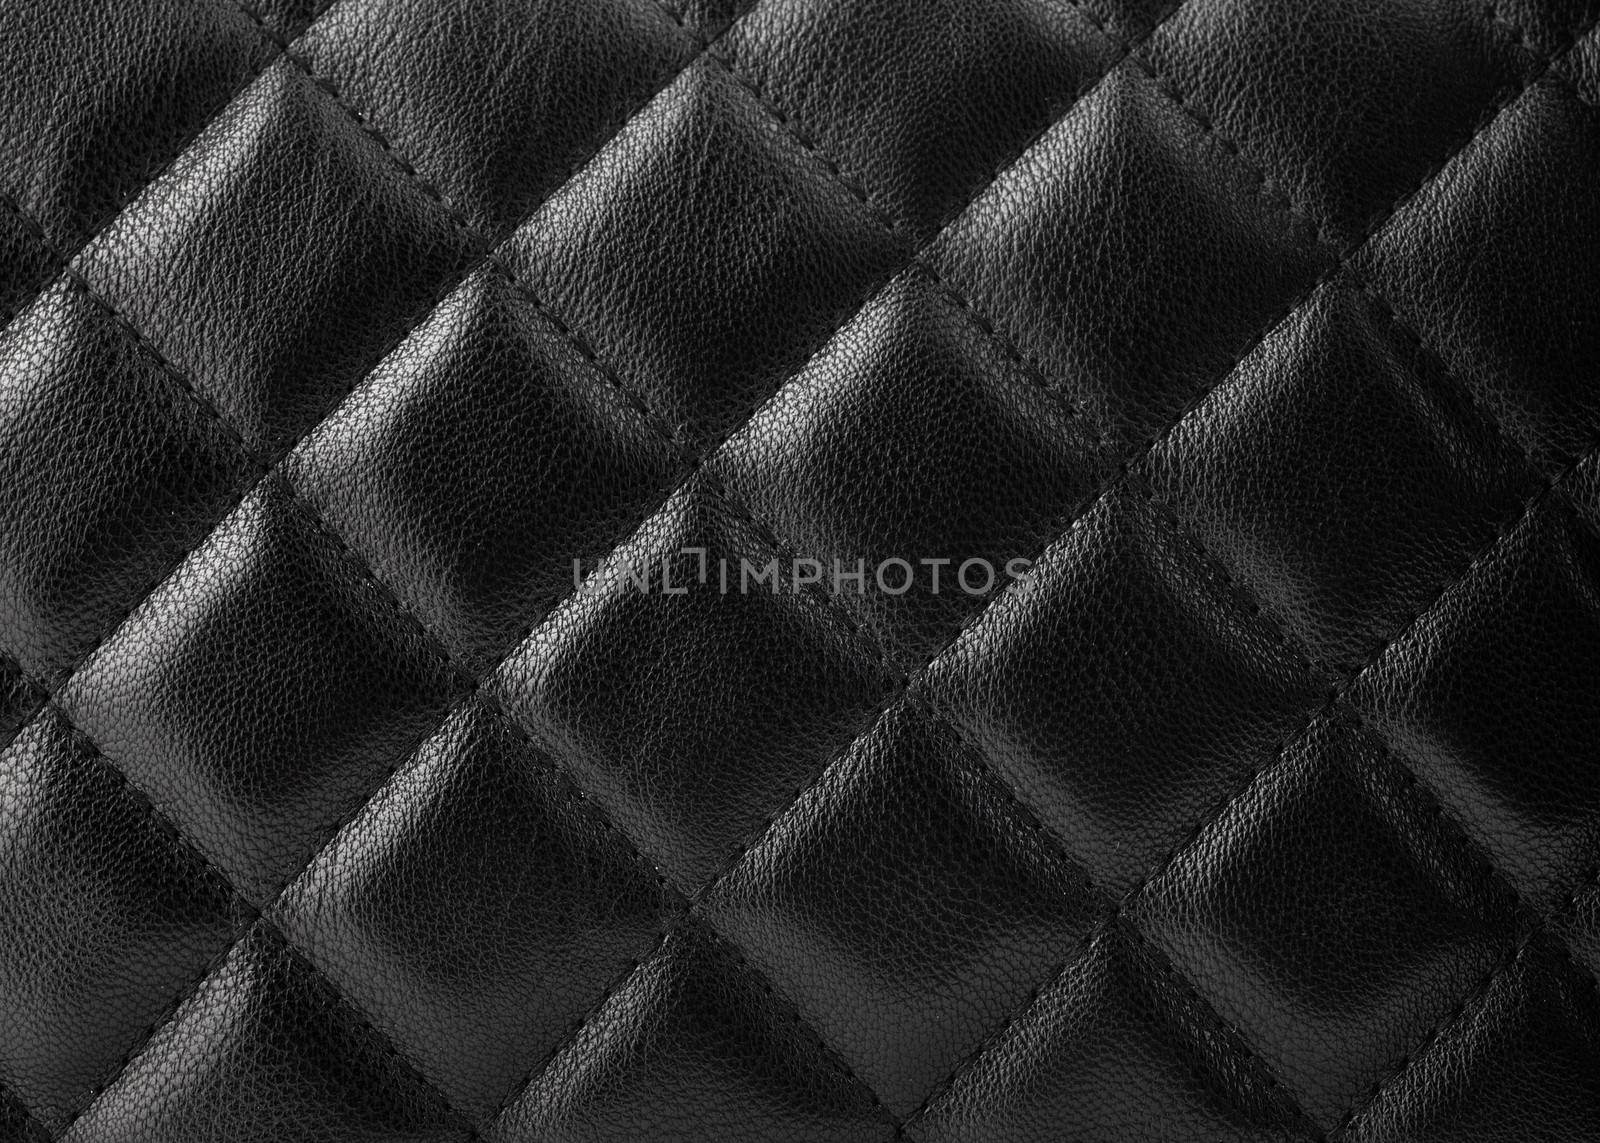 Black leather upholstery by gilmanshin